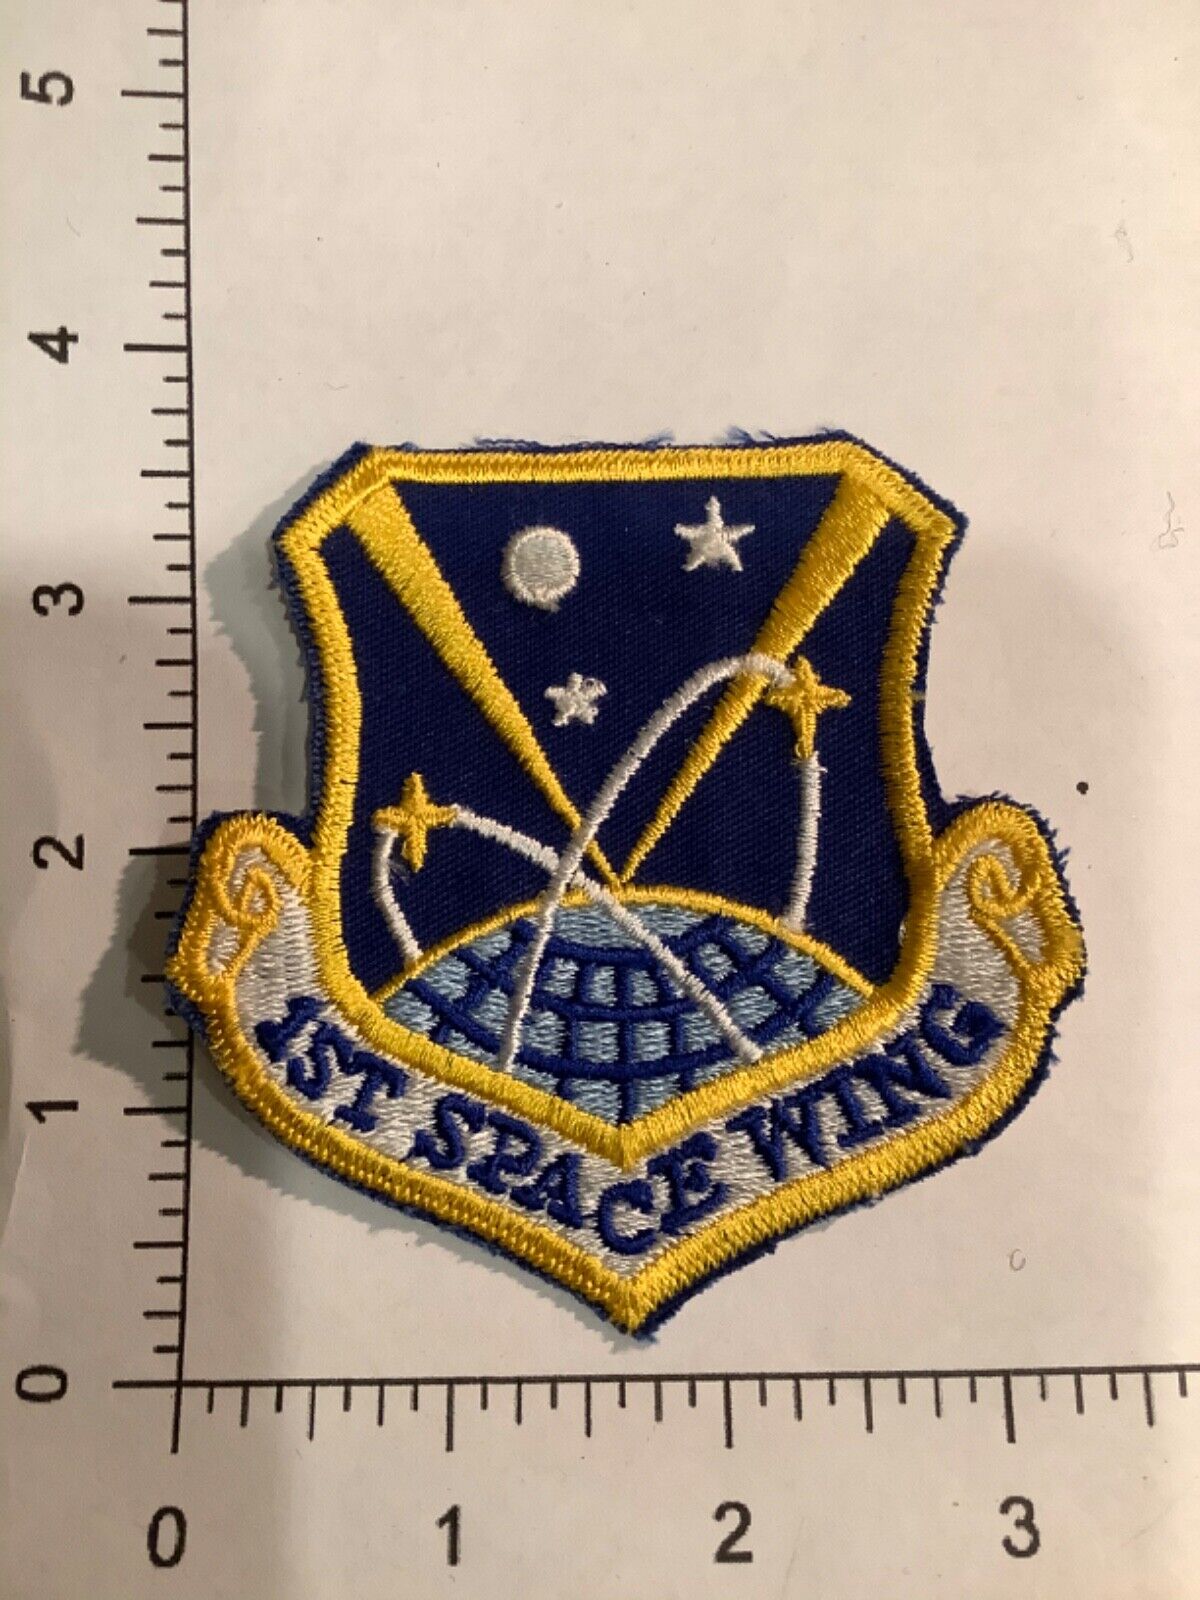  U.S.A.F. 1ST SPACE WING SQUADRON PATCH